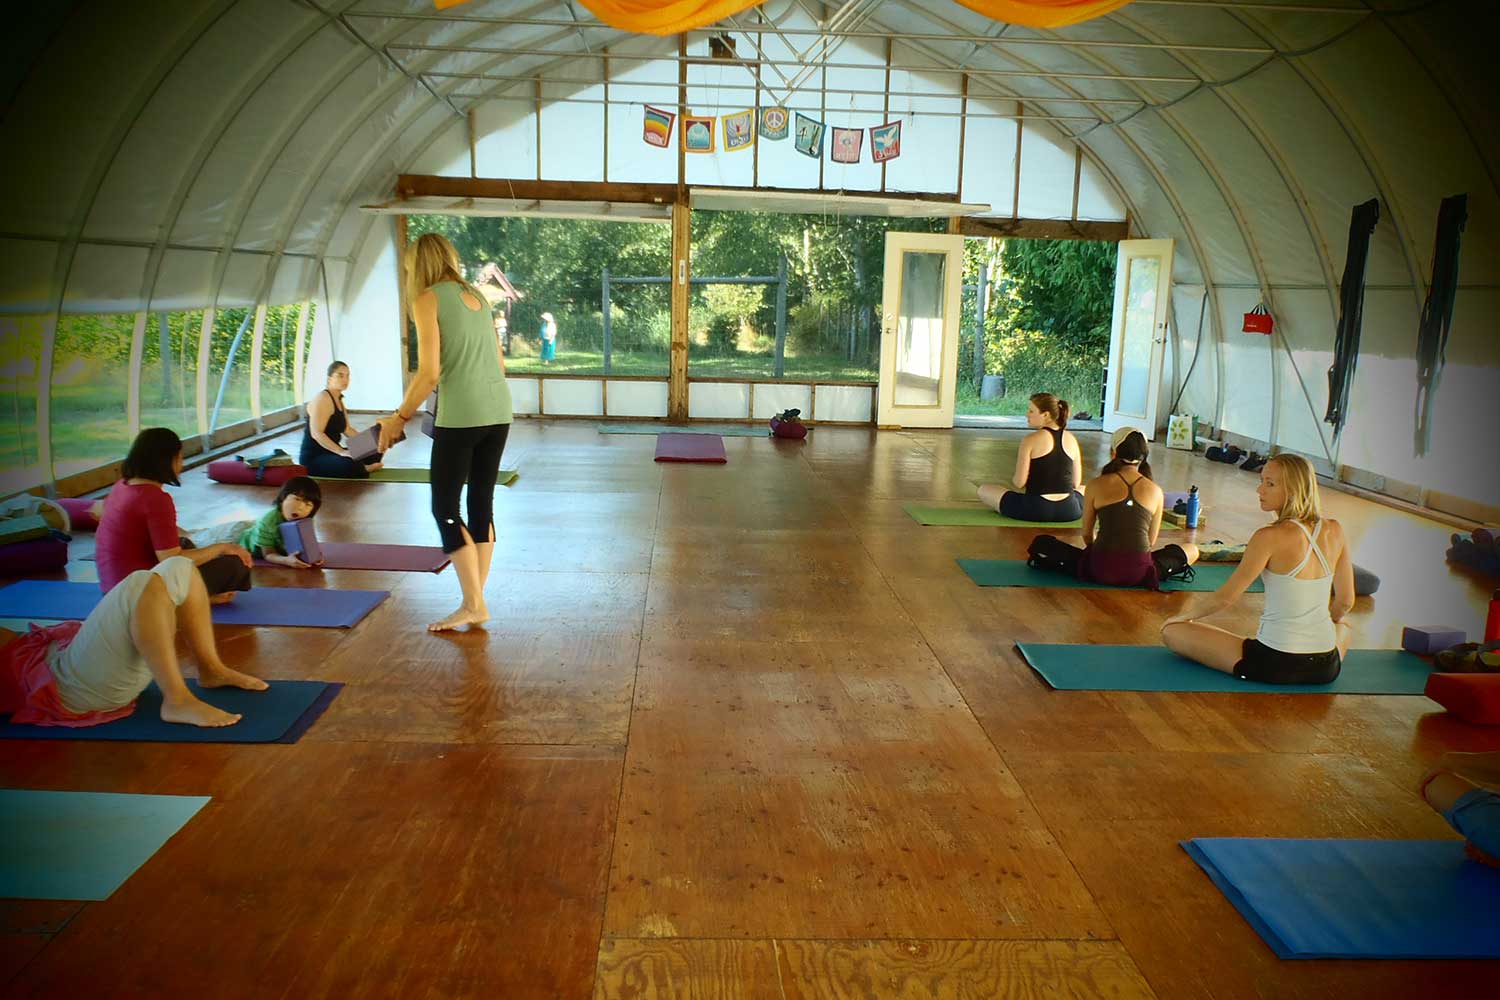 Pond Dome summer retreat rental space at the Salt Spring Centre of Yoga